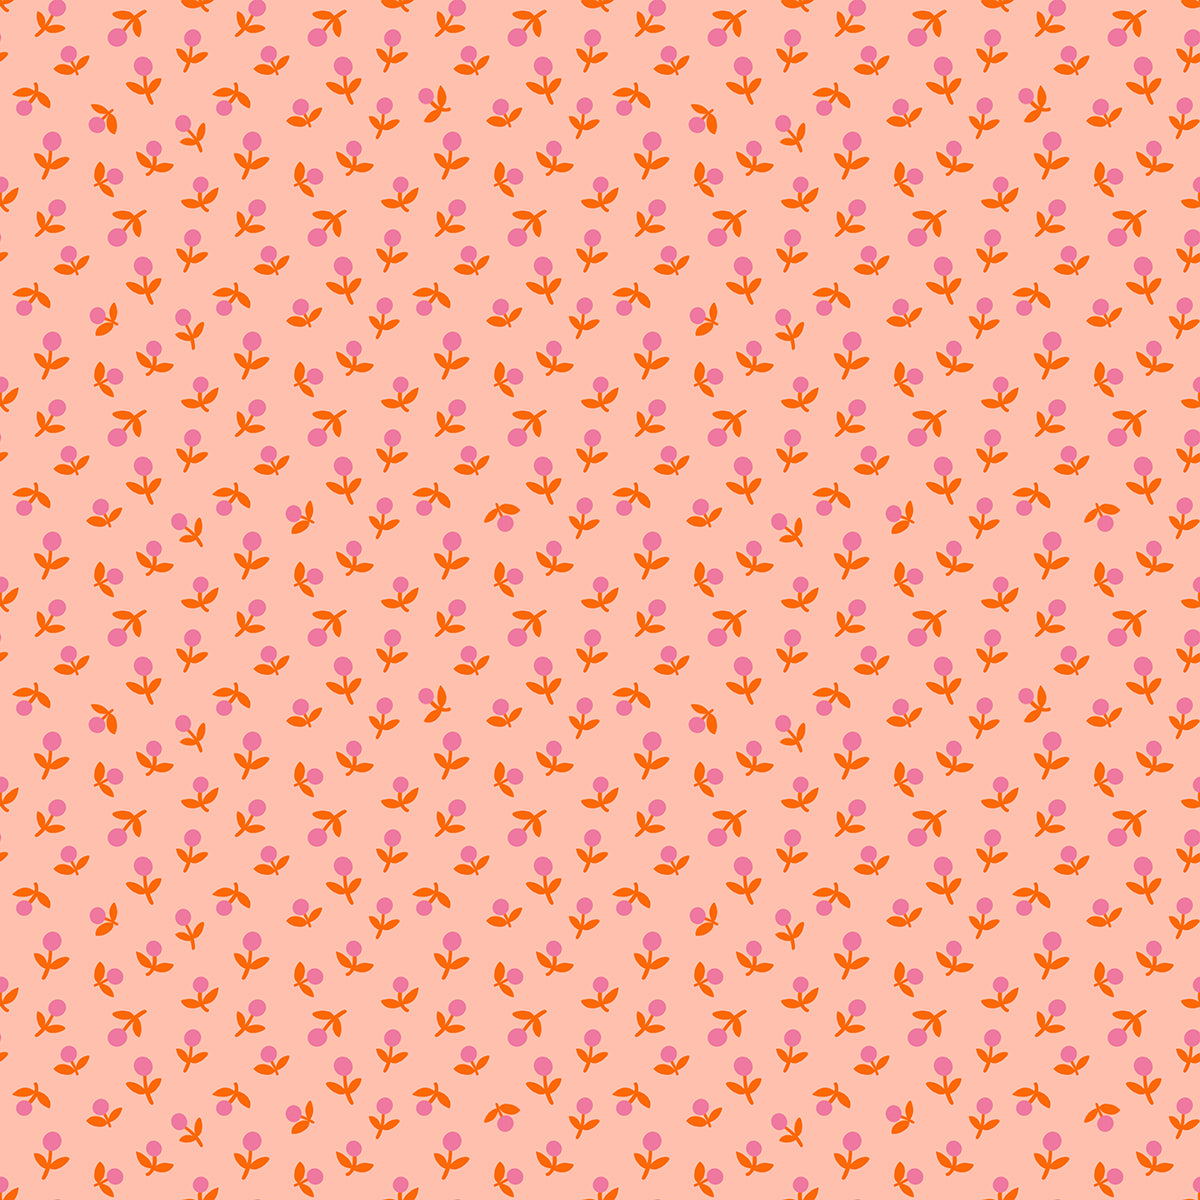 Sprout- Peach from Meadow Star by Alexia Abegg for Moda Fabrics